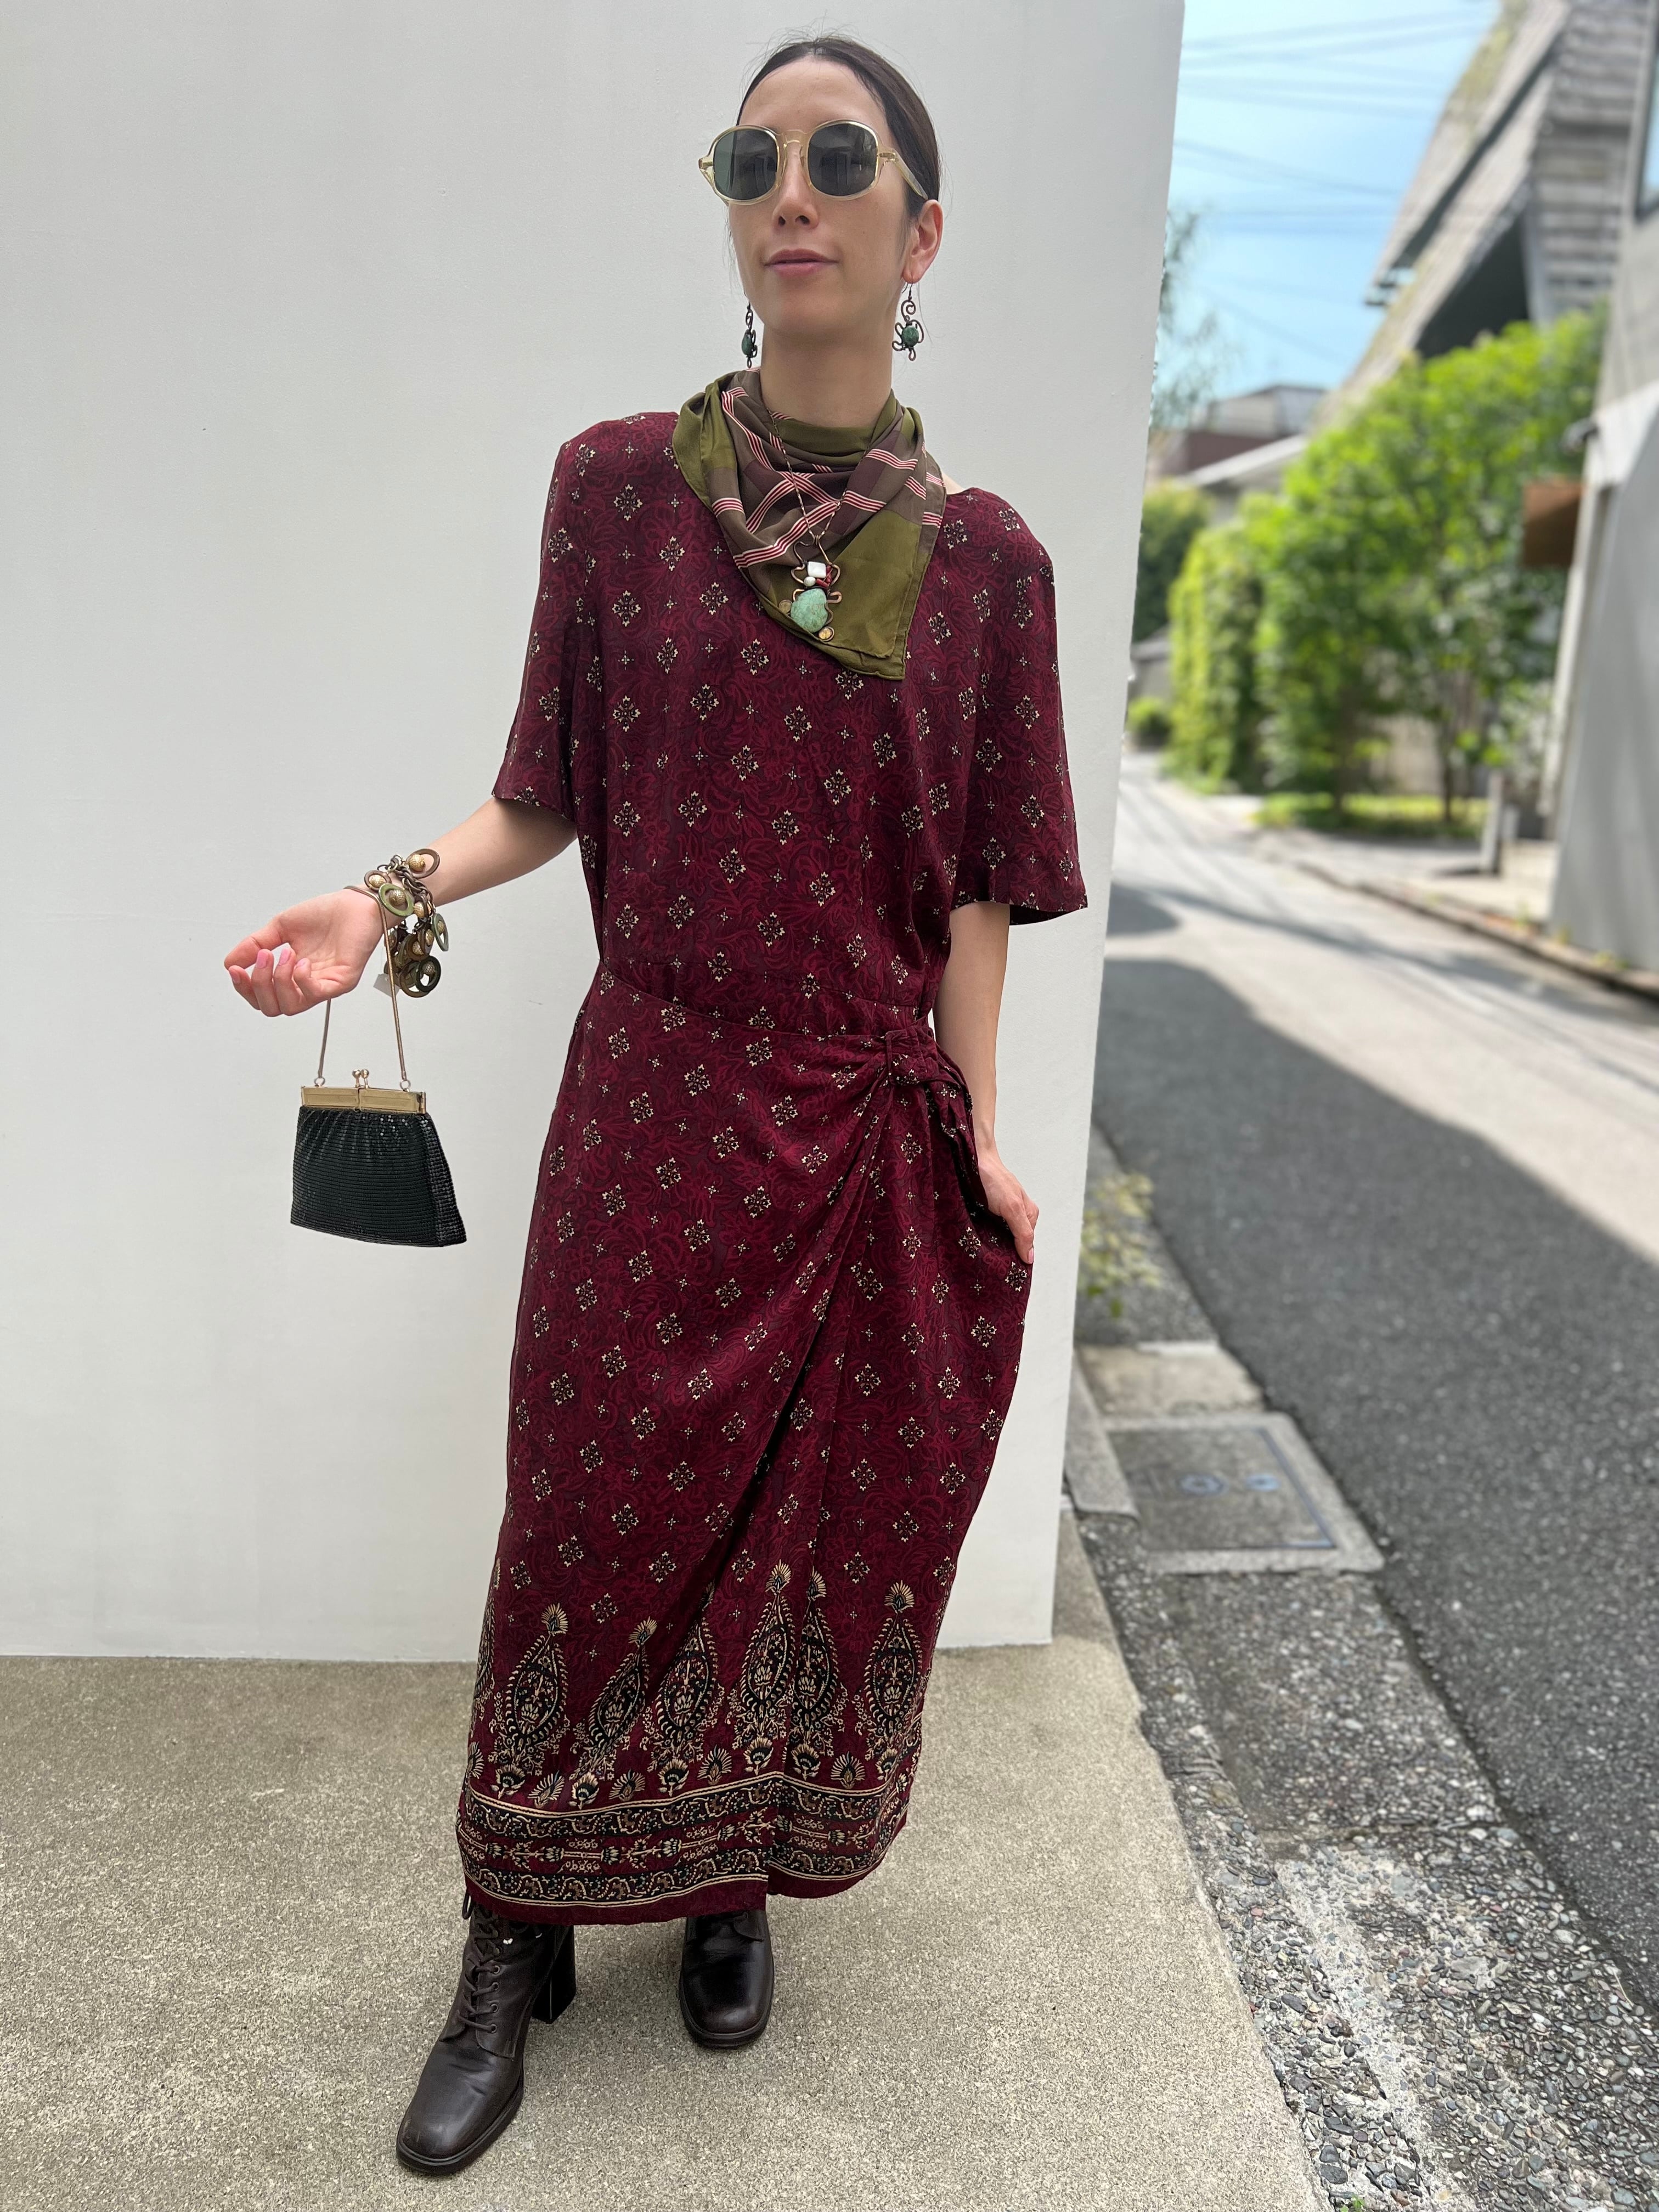 80s wine red floral silk dress ( ヴィンテージ ワインレッド シルク